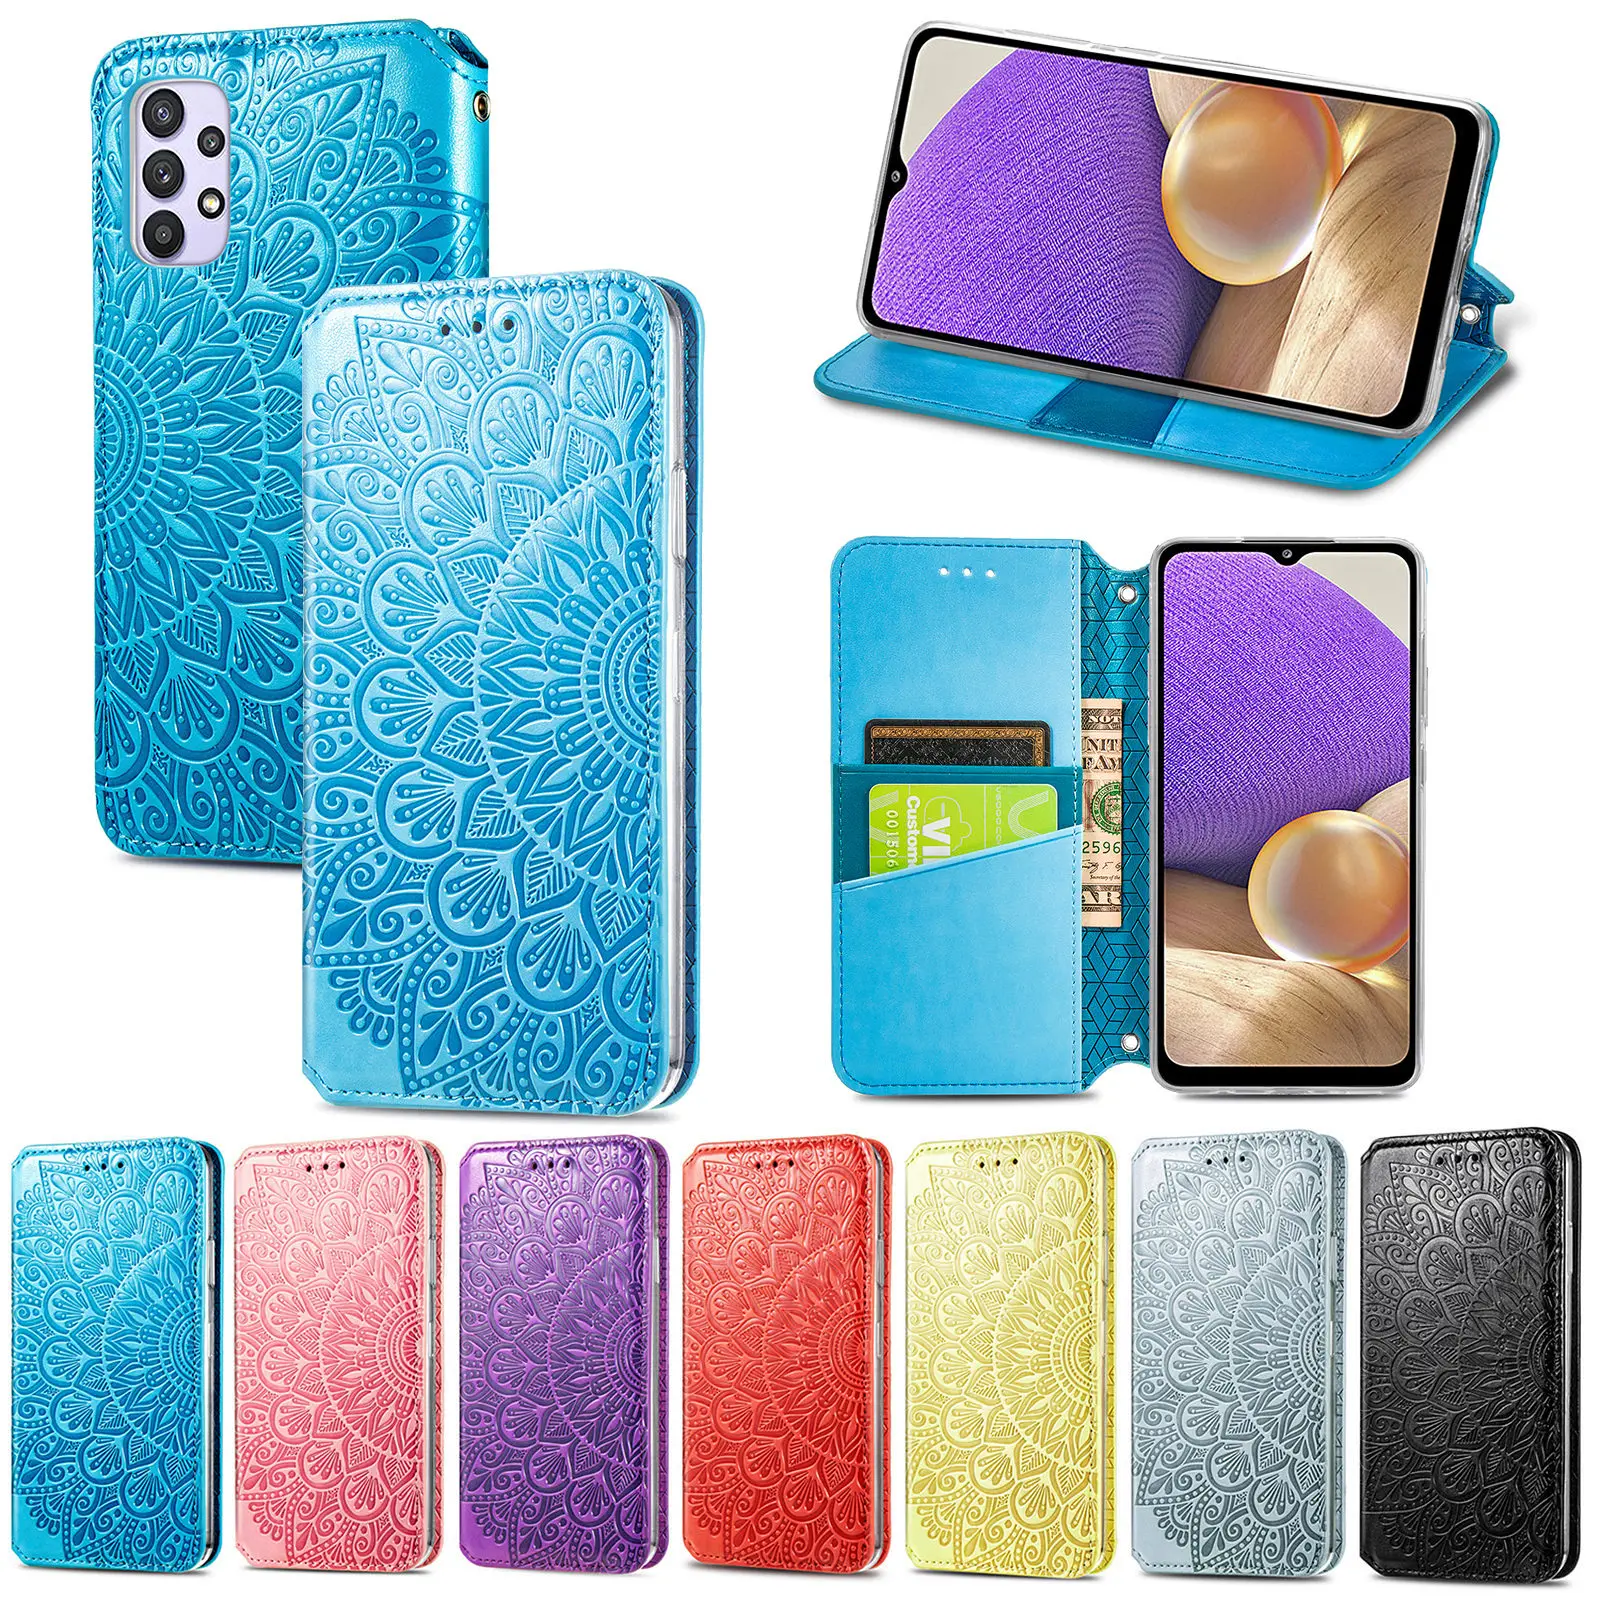 

Embossed Wallet Case for Samsung Galaxy A32 A72 A52 A51 A71 A22 A50 A30 A21S A11 Luxury Leather Magnetic Flip Protection Cover